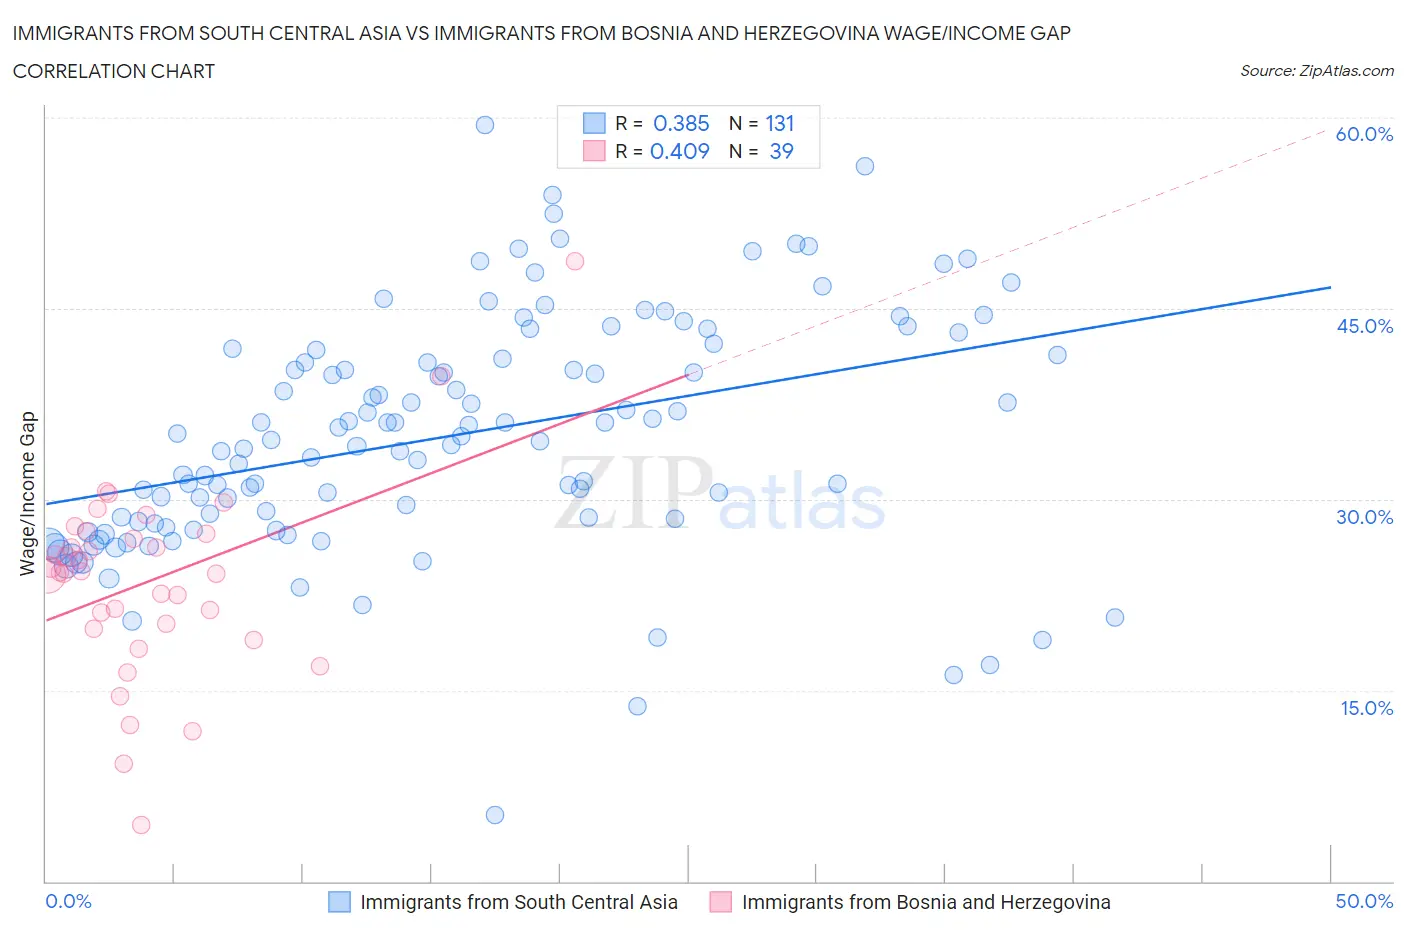 Immigrants from South Central Asia vs Immigrants from Bosnia and Herzegovina Wage/Income Gap